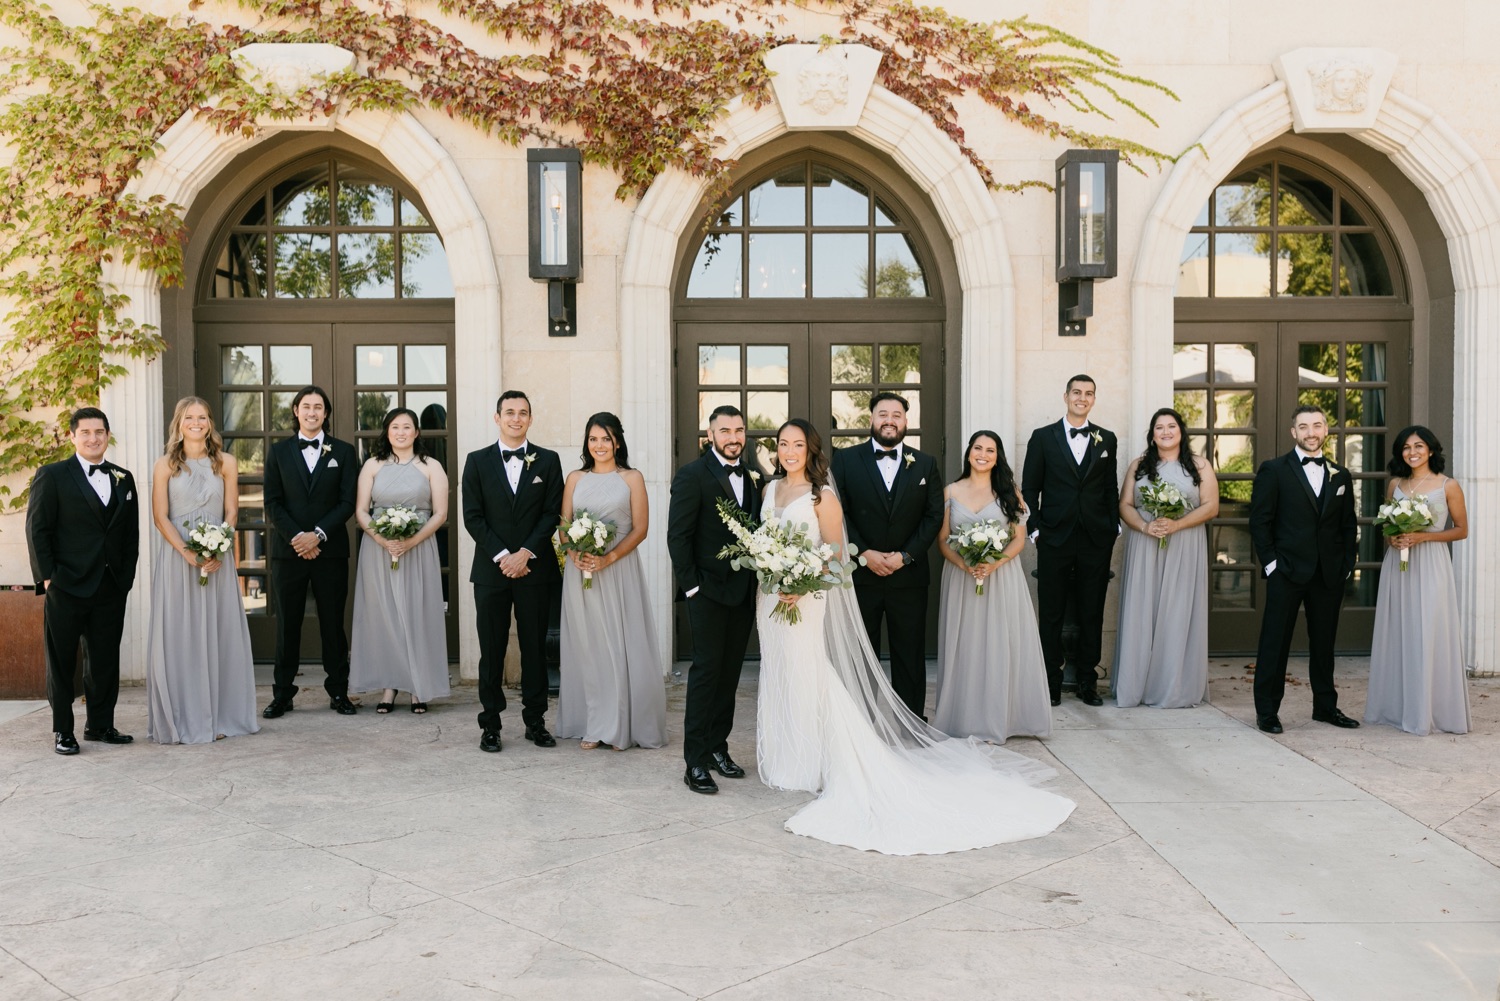 Wedding party portraits at tooth and nail winery by tayler Enerle photography